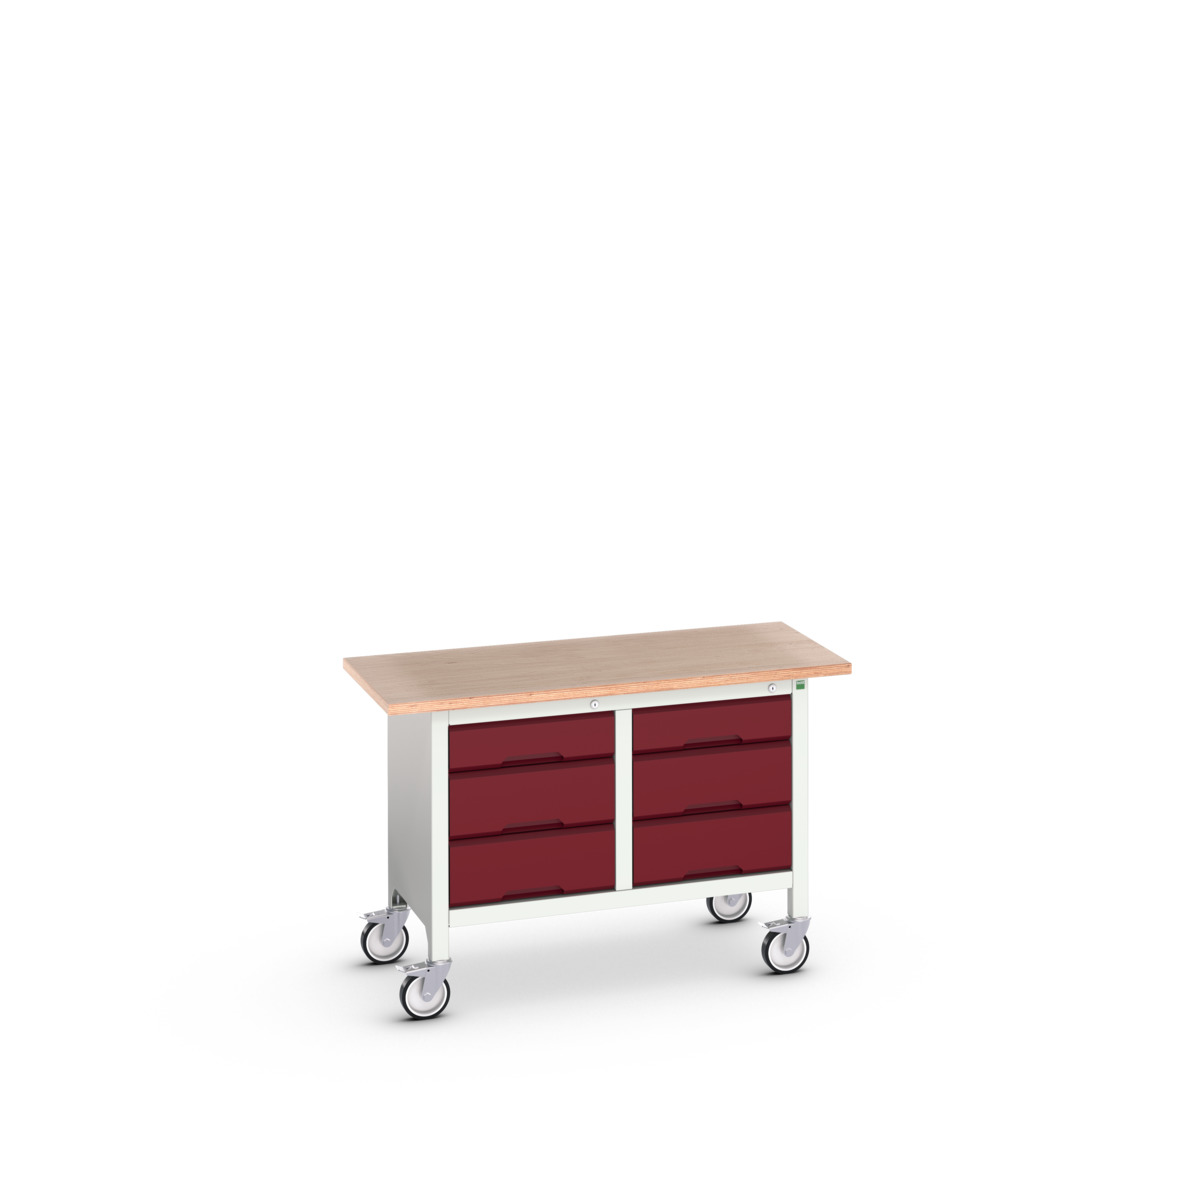 16923204.24 - verso mobile storage bench (mpx)